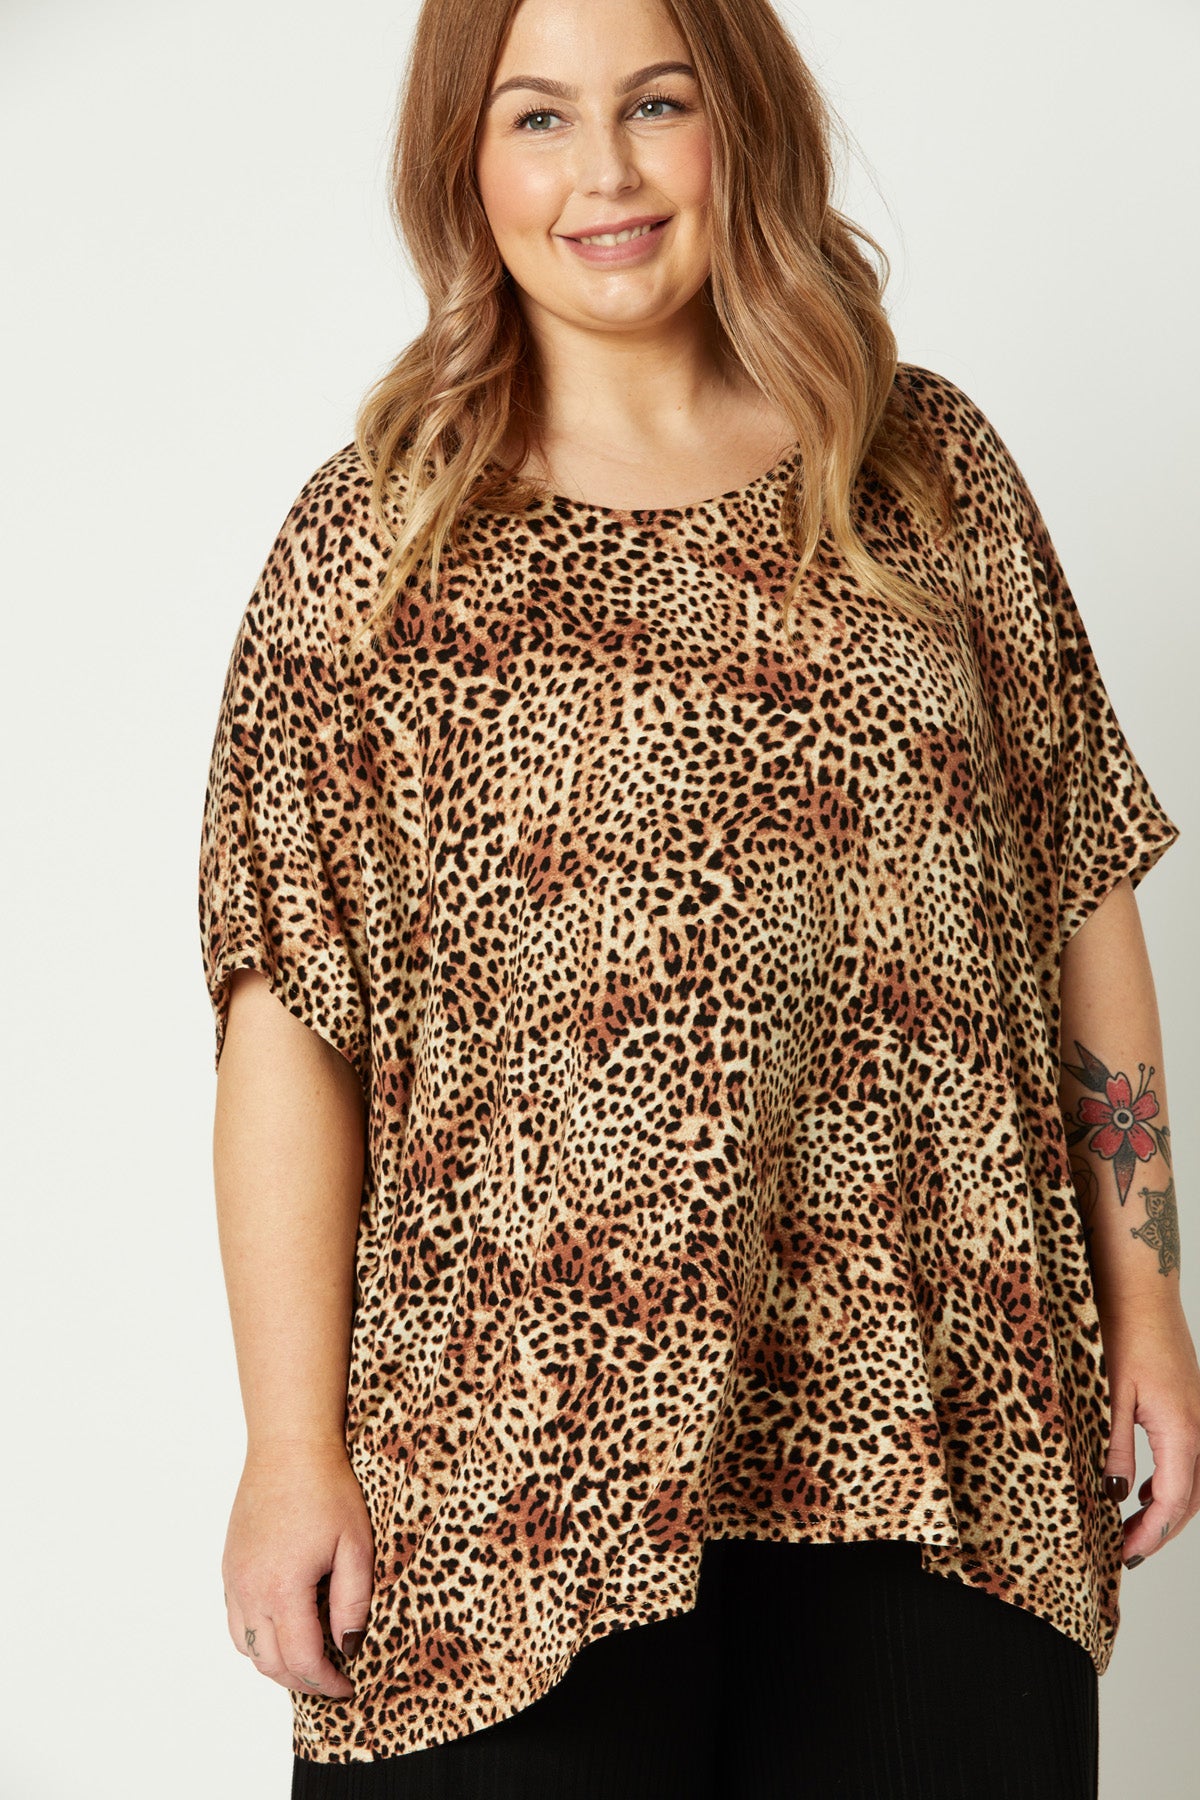 Lioness Top - Cheetah - eb&ive Clothing - Top S/S One Size